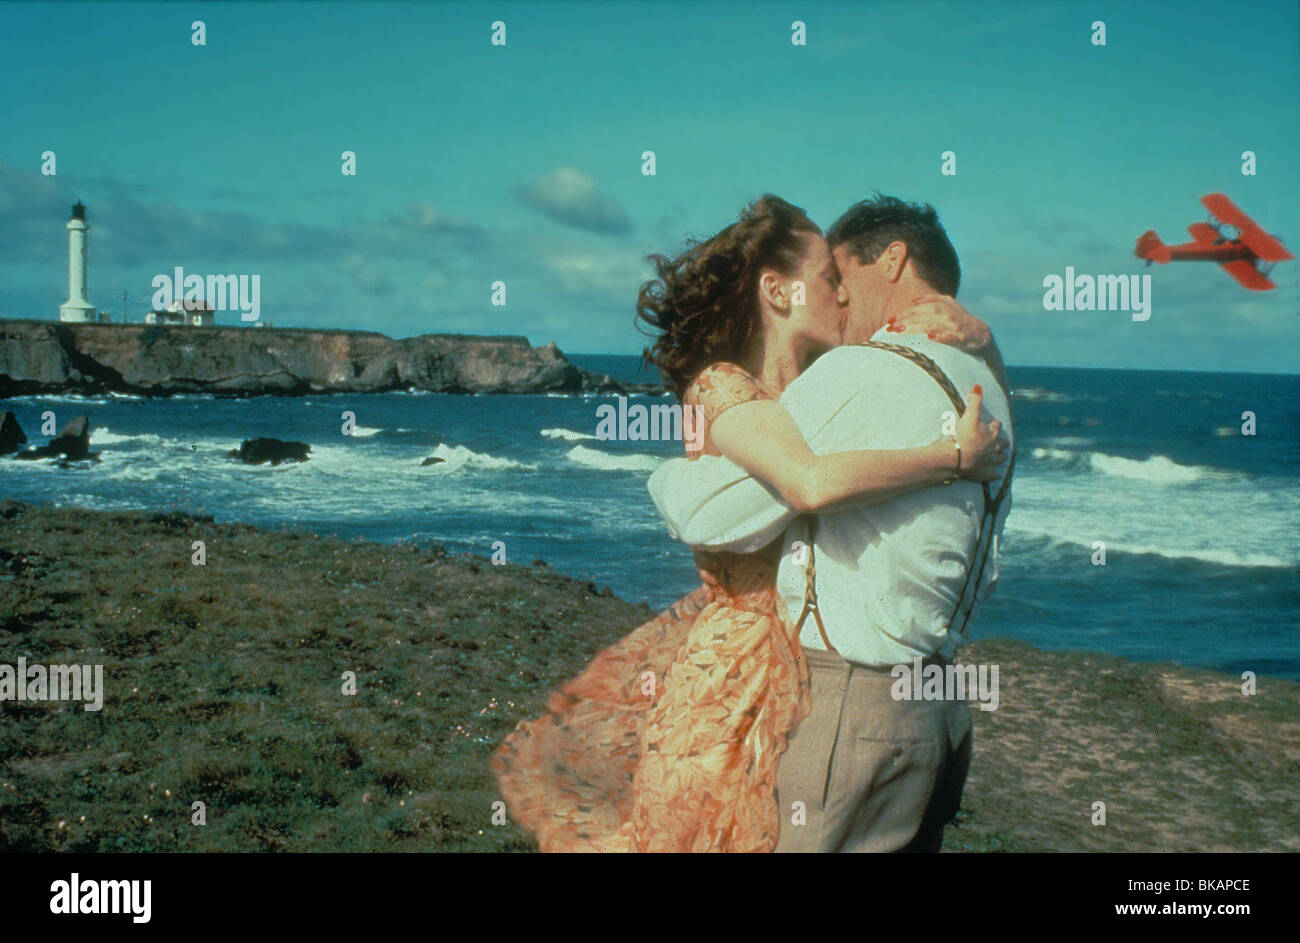 FOREVER YOUNG (1992) ISABEL GLASSER, MEL GIBSON FVYN 046 MOVIESTORE COLLECTION LTD Stock Photo